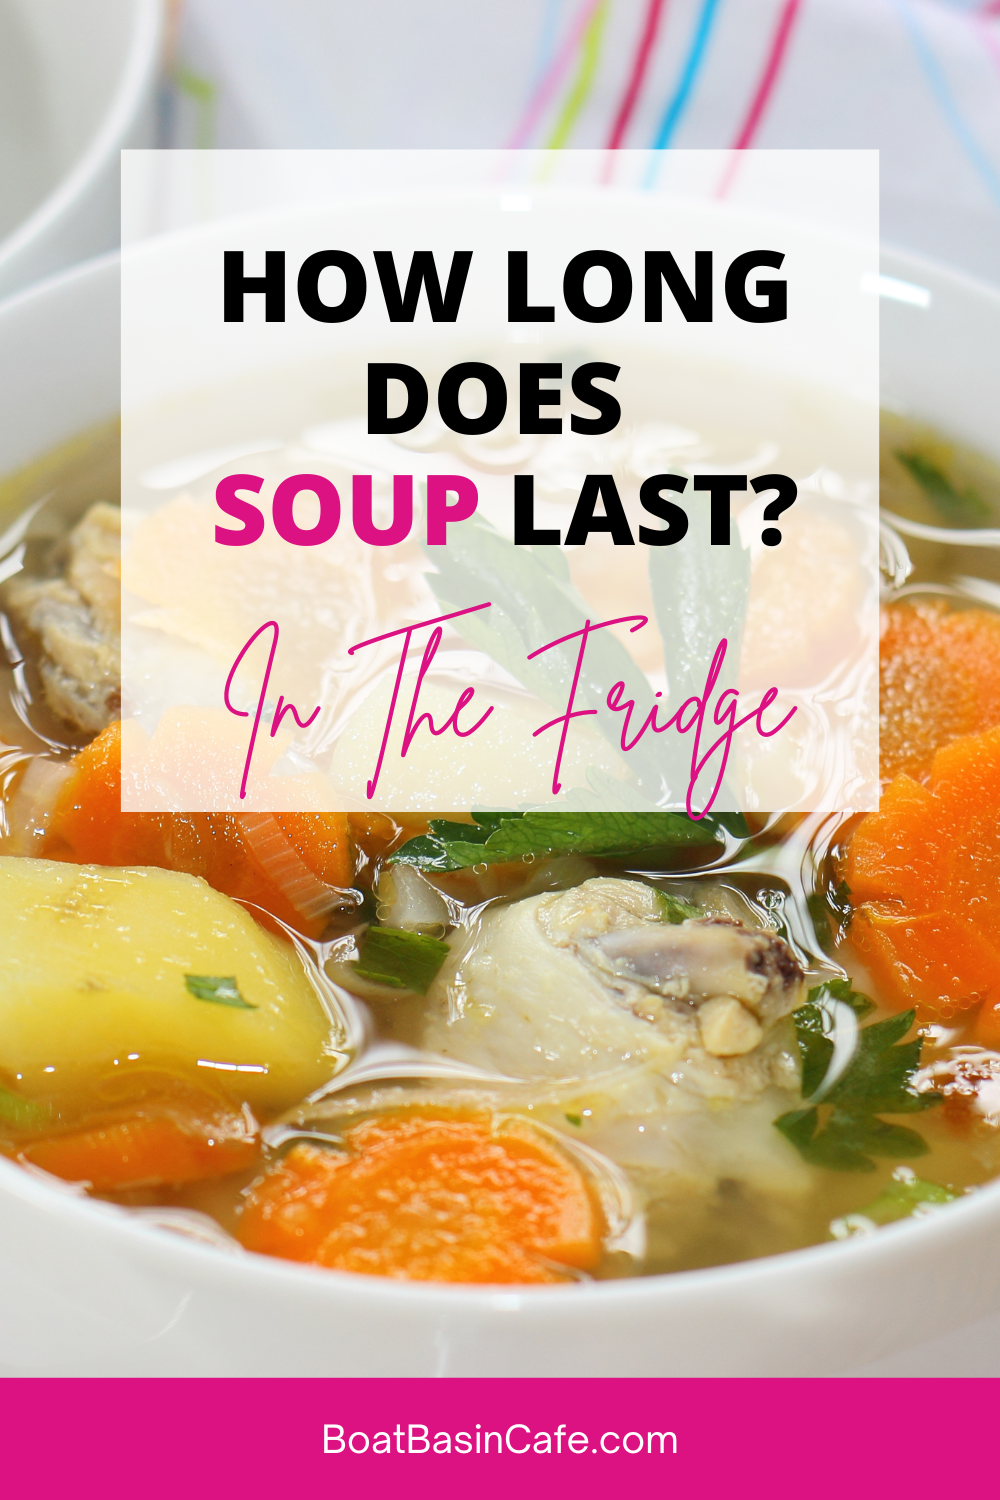 How Long Does Soup Last In The Fridge?